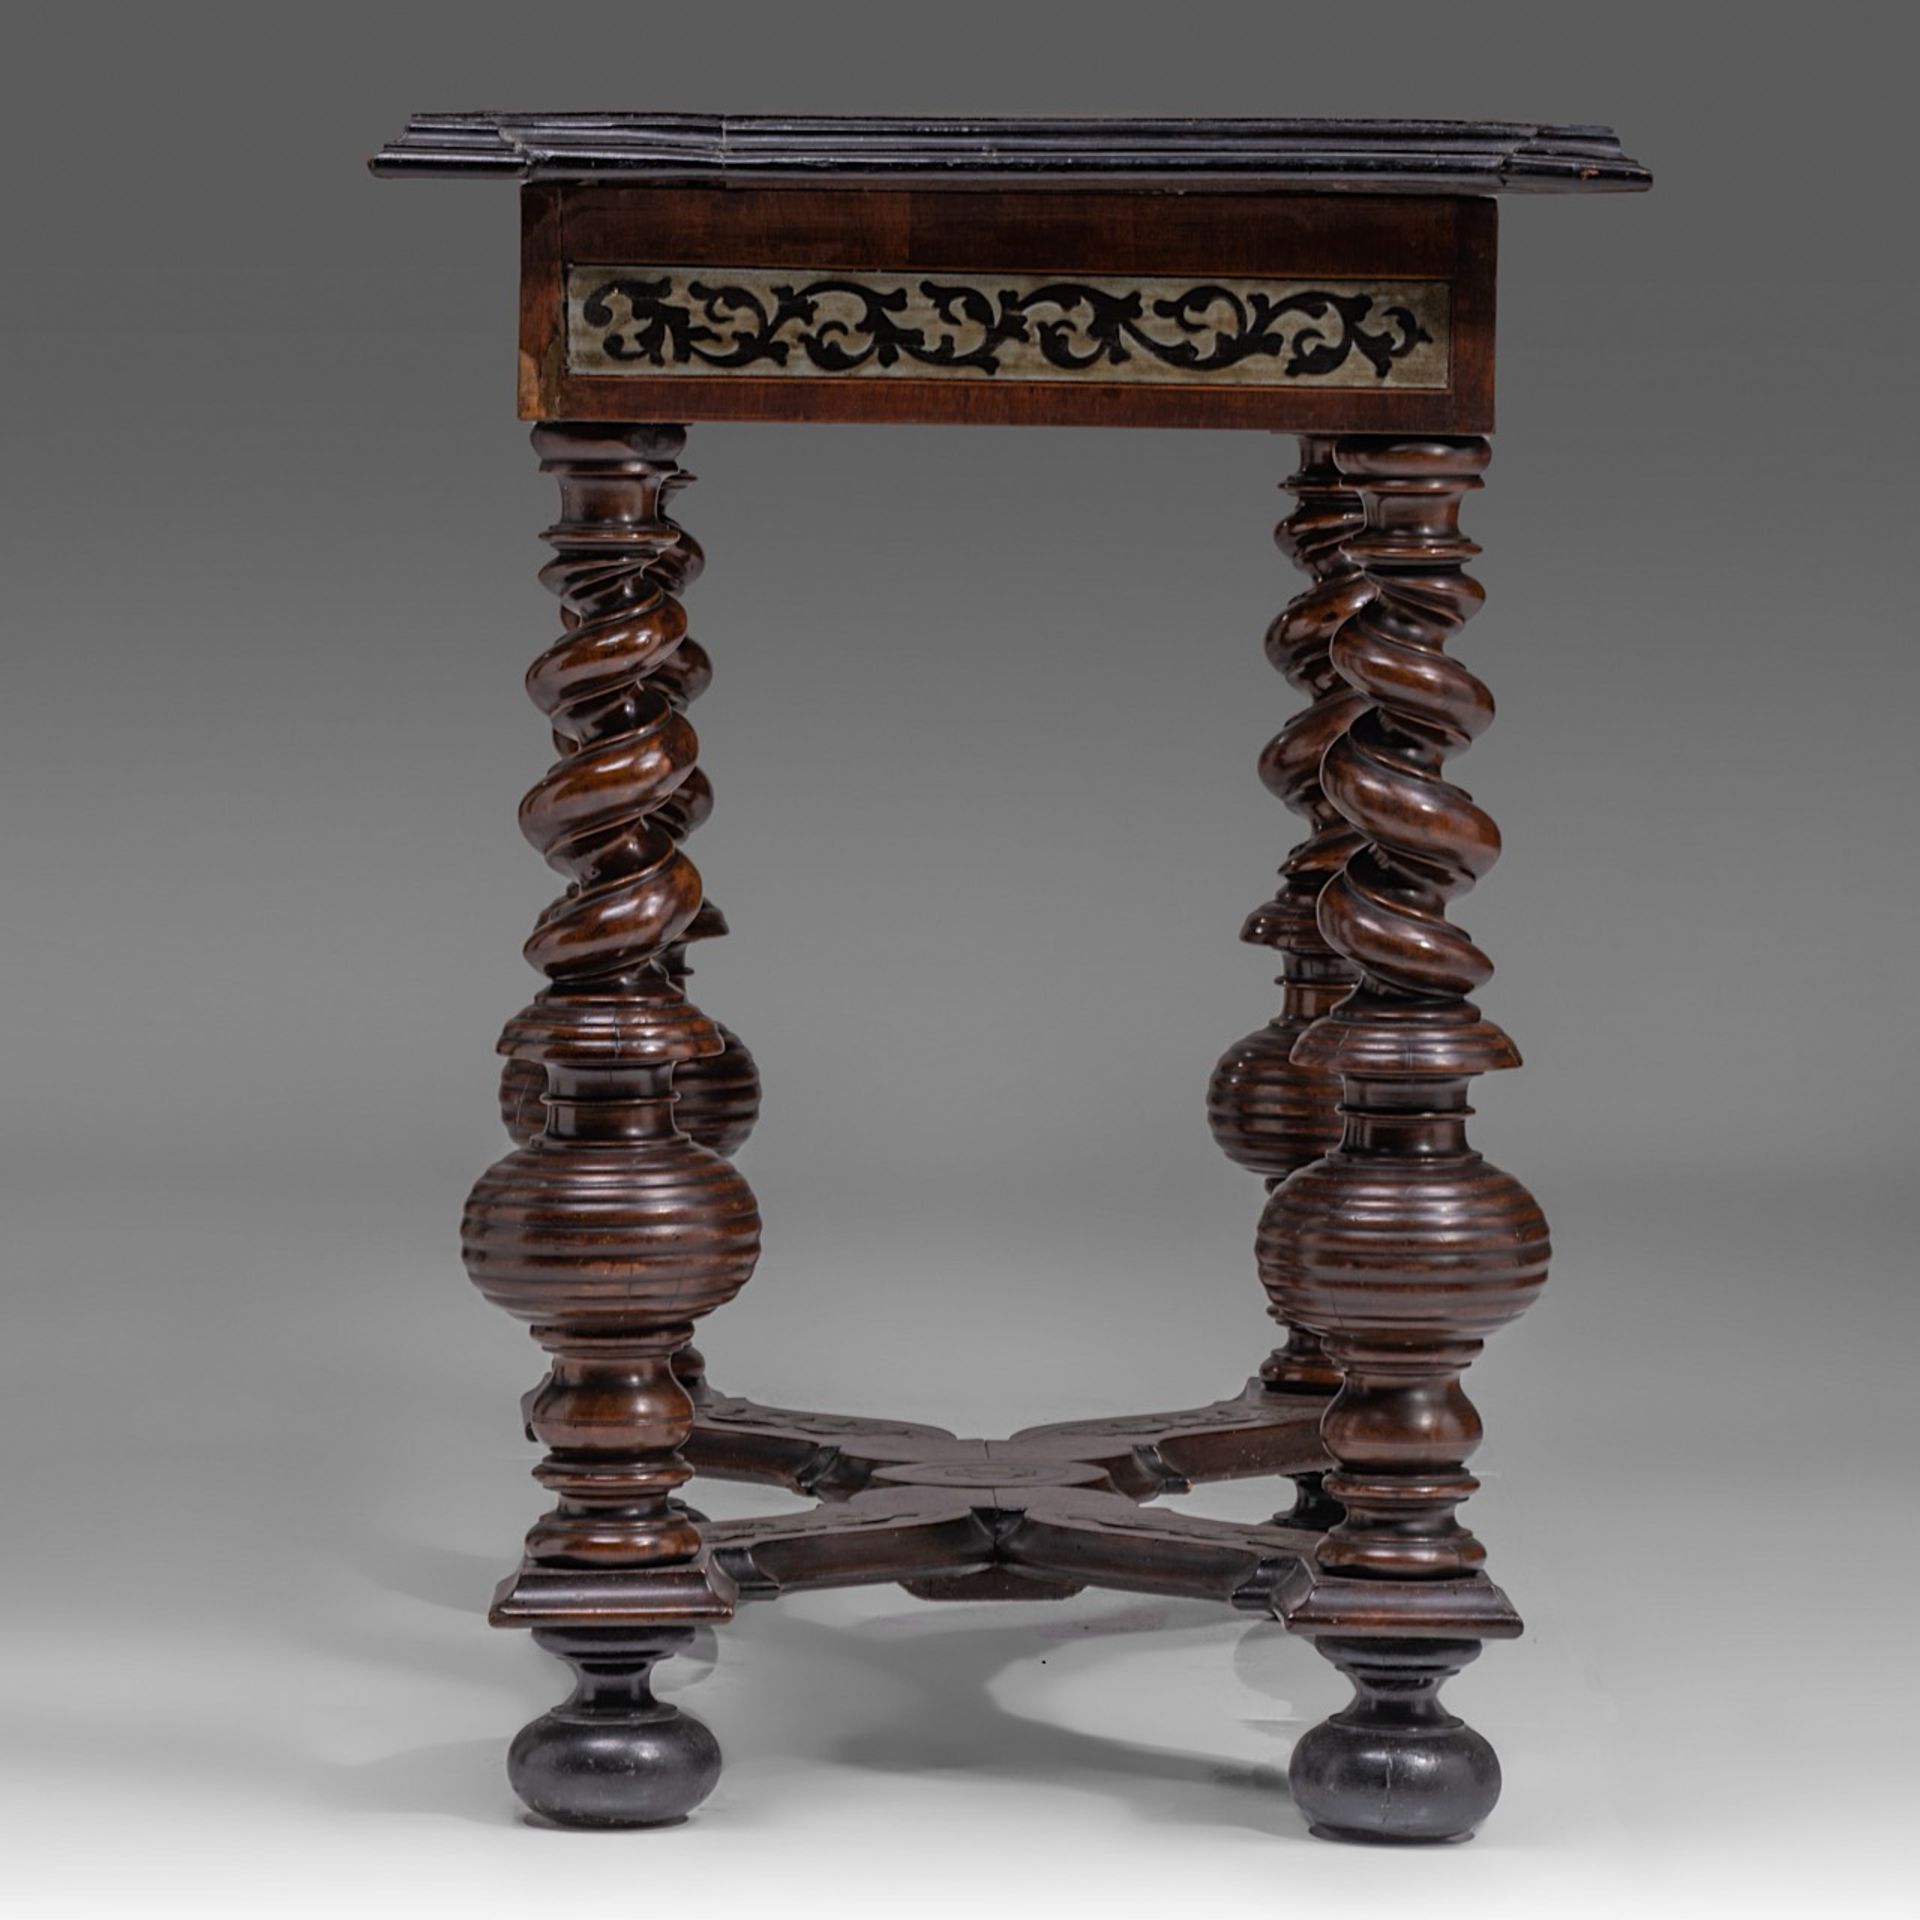 A fine Baroque rosewood and mahogany veneered centre table, 17thC, H 80 - W 105 - D 60 cm - Image 3 of 7